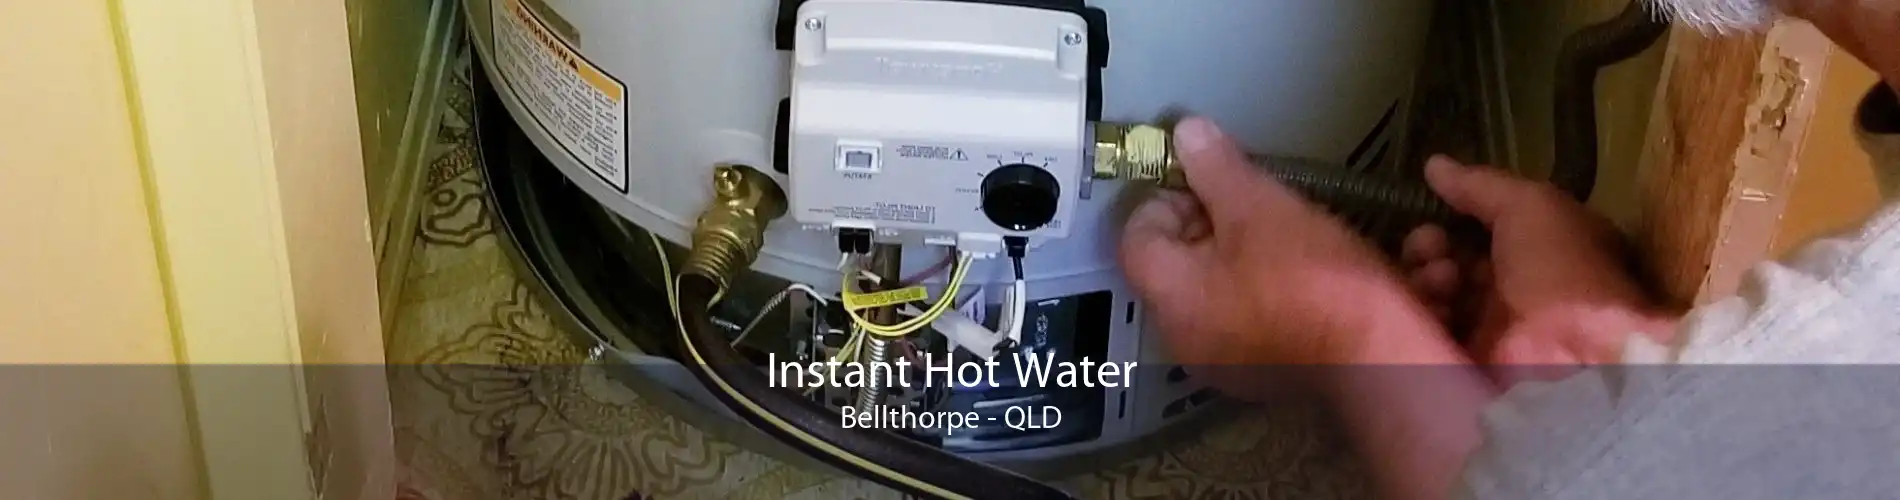 Instant Hot Water Bellthorpe - QLD